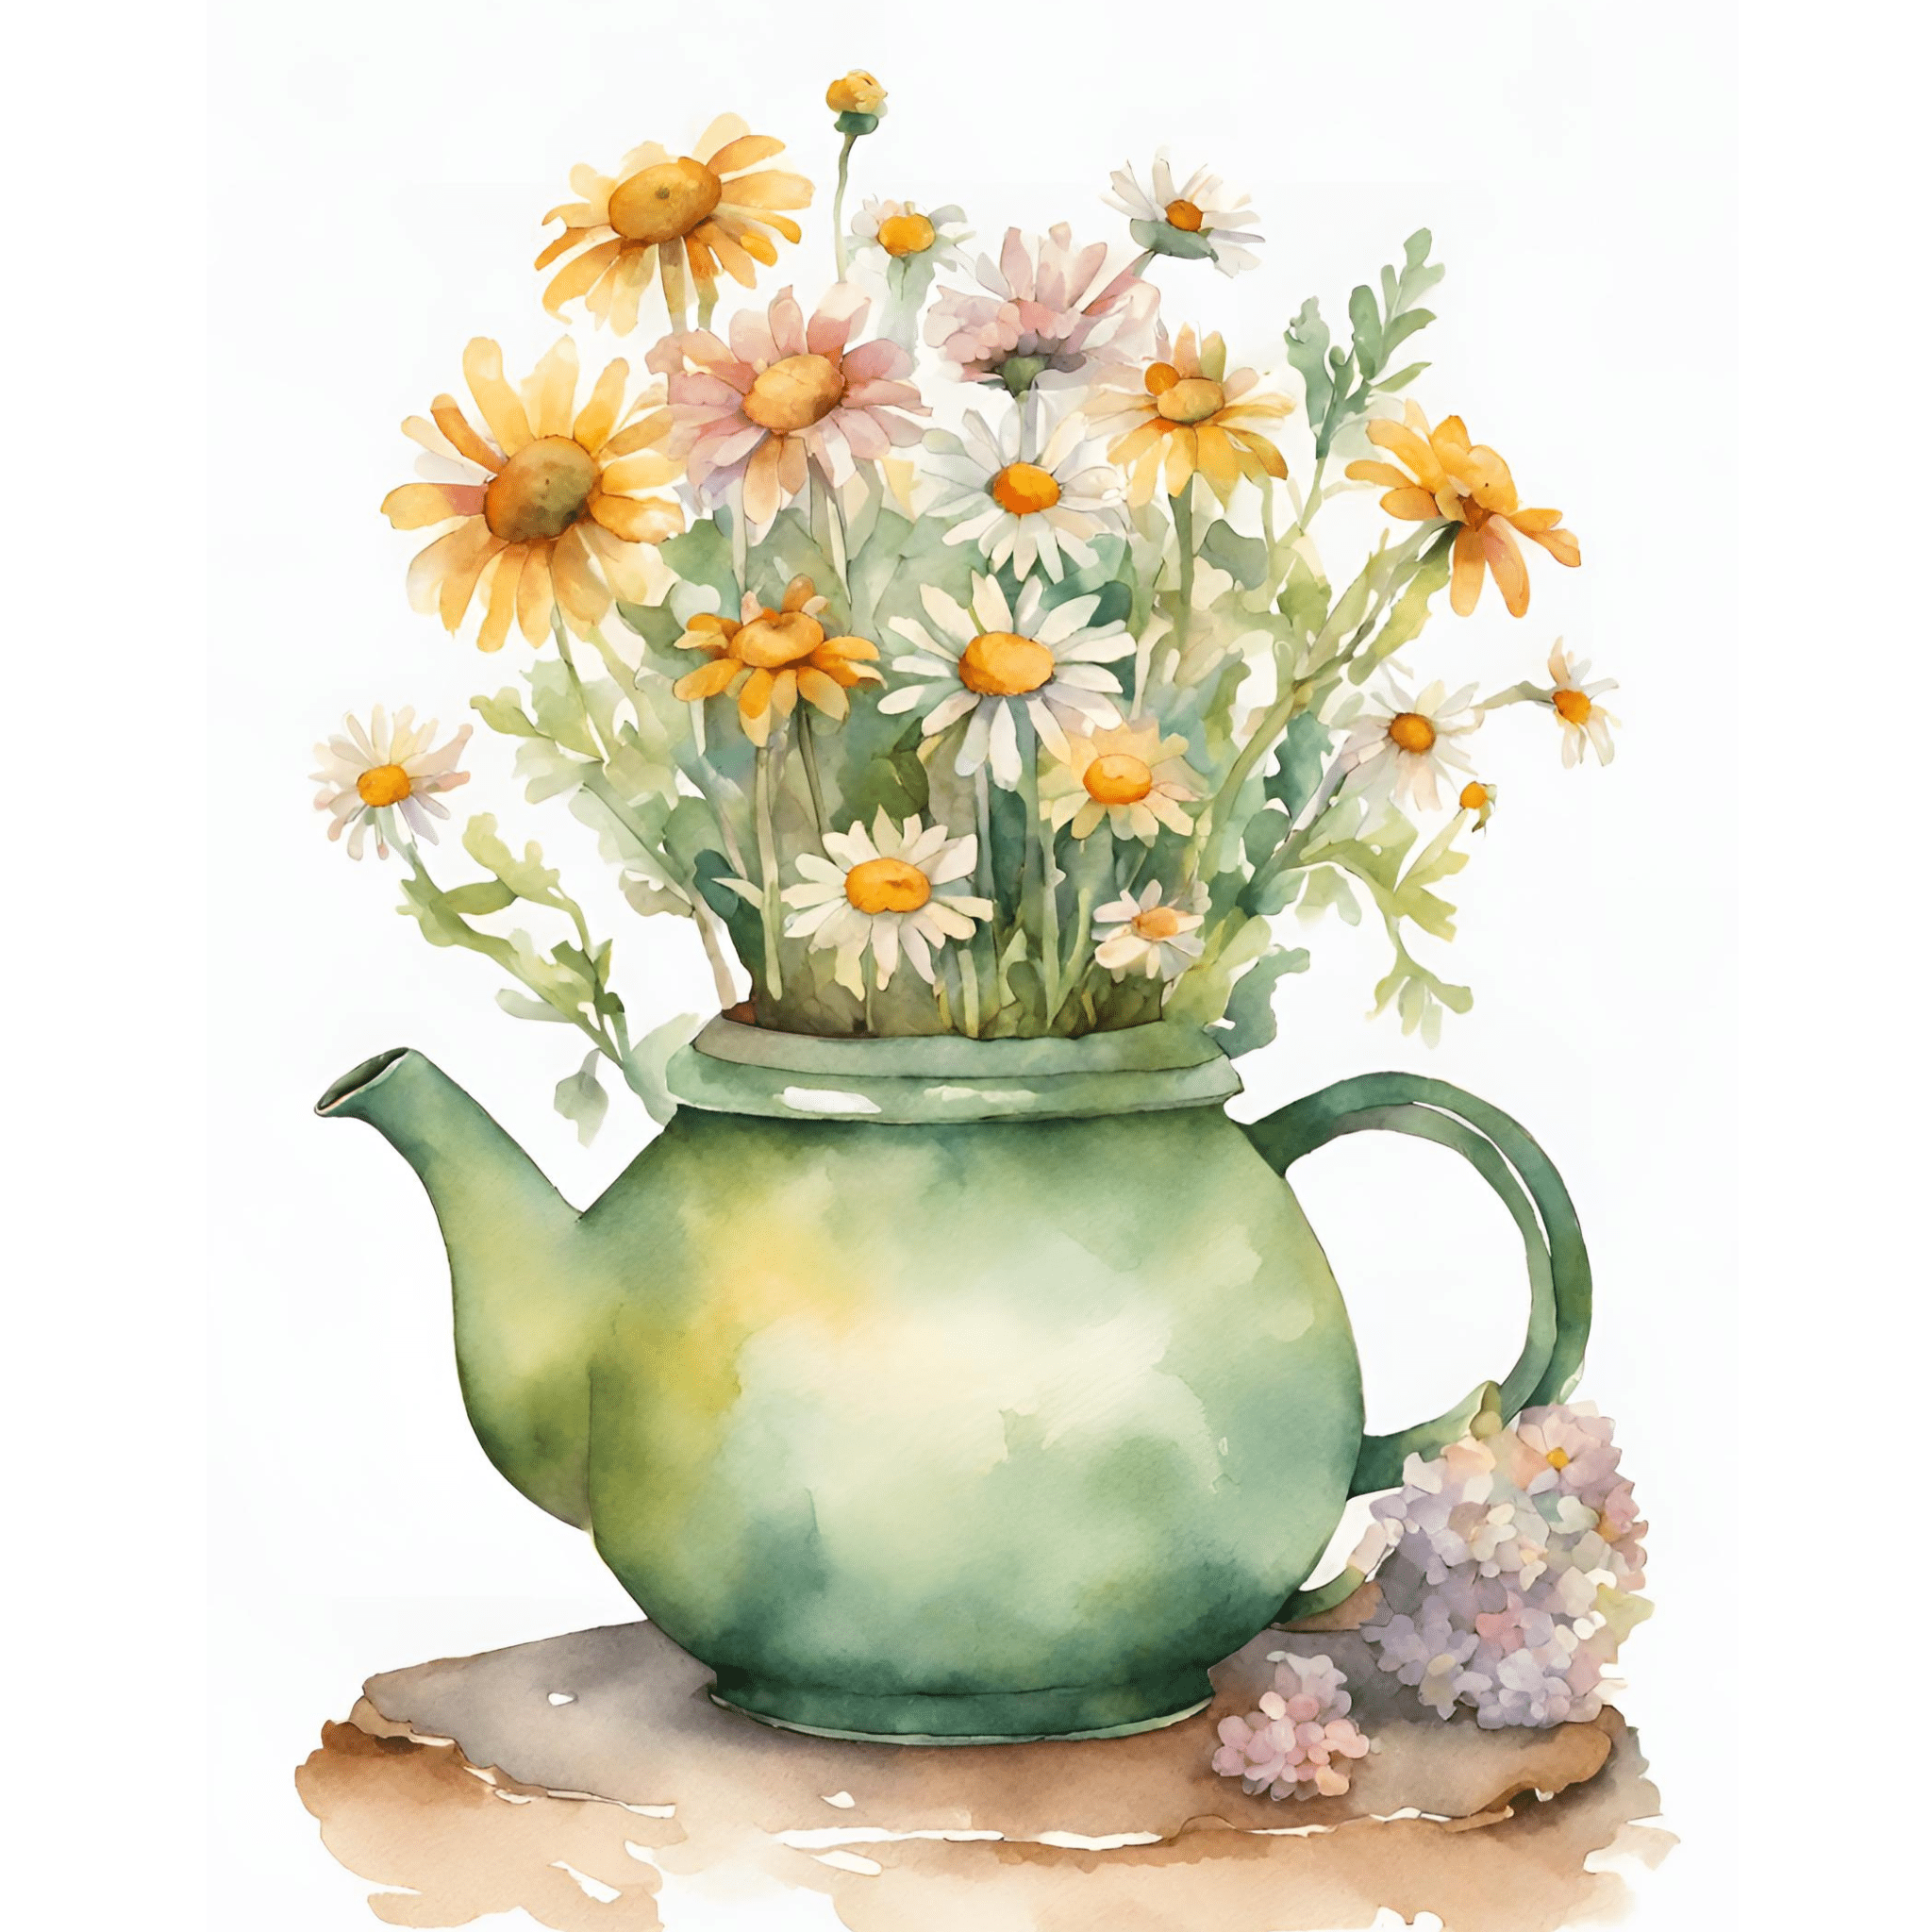 GREEN TEAPOT WITH DAISIES & LILAC ART PRINT - PLUME & WILLOW